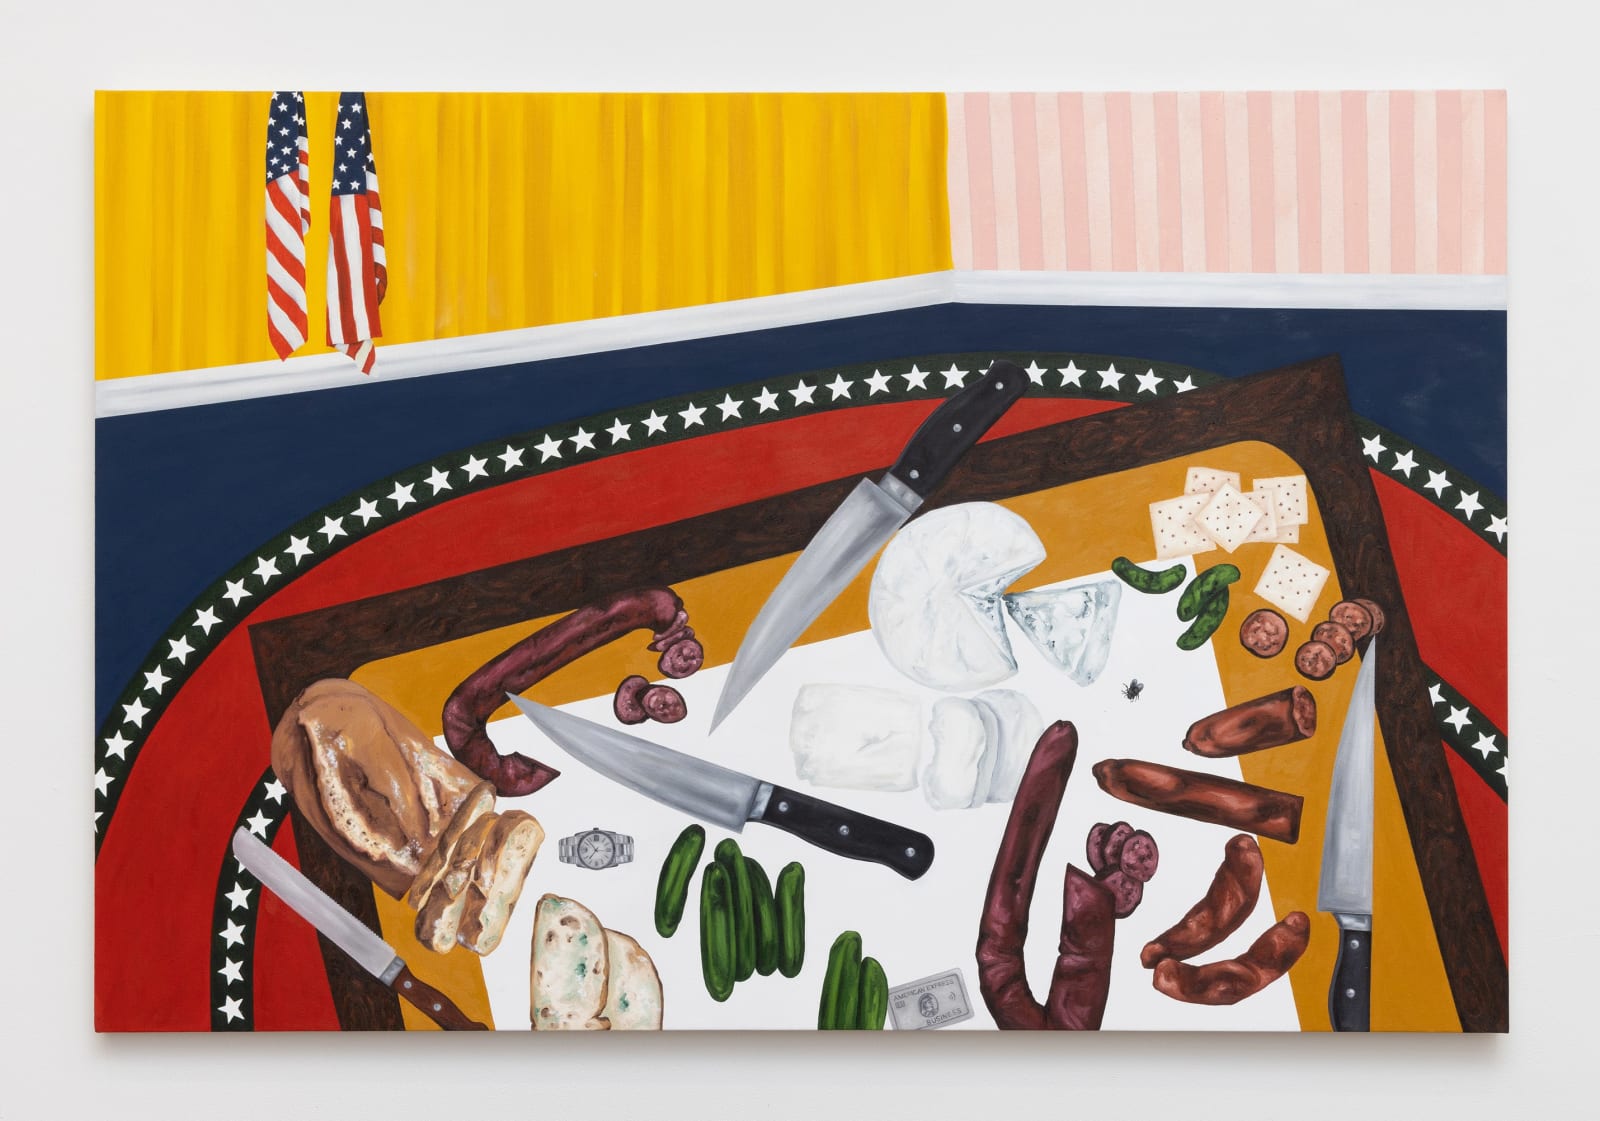 Painting of a charcuterie board tilted at an angle, filled with cheese, moldy bread, crackers, pickles, salami, four knives, a credit card, and a Rolex watch. Two American flags hung in the corner of the room which has navy floor with white starred outline red rug, with the pink striped and yellow striped wallpaper from right to left.